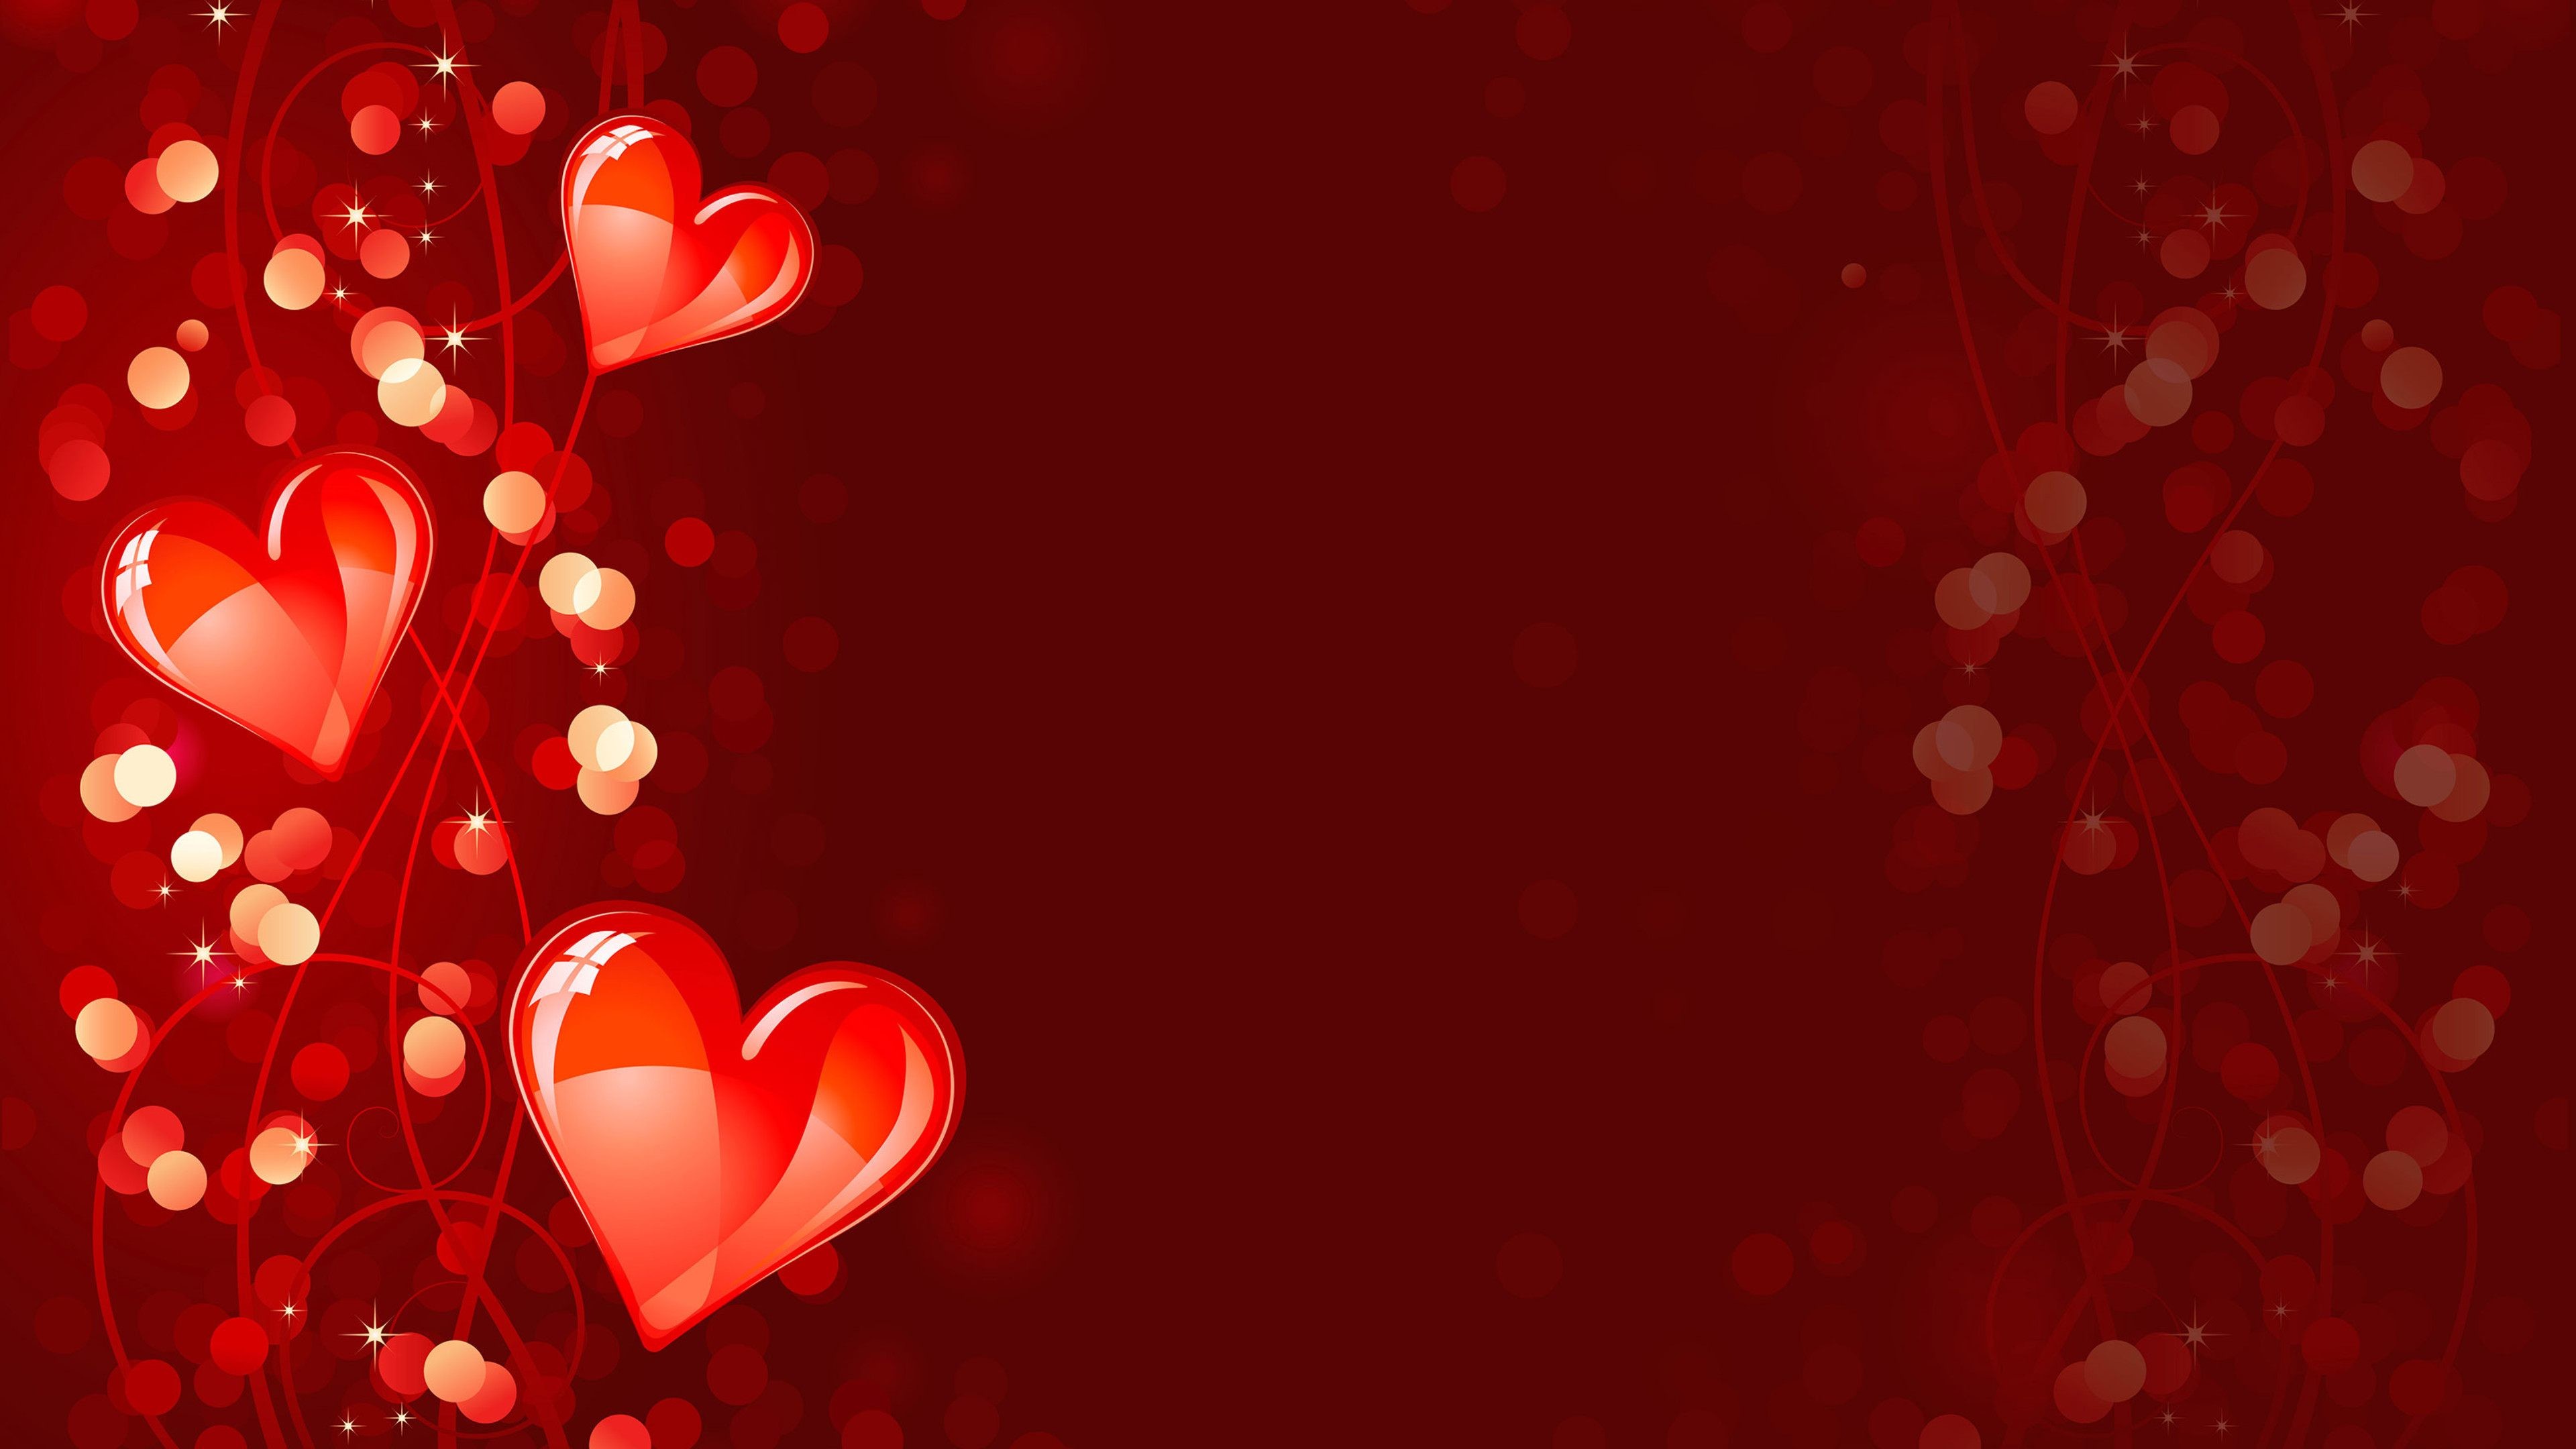 Full Size Of Coloring Page Glamorous Red Heart Wallpaper 3 D Hd 915x515 Coloring Page 3840x2160